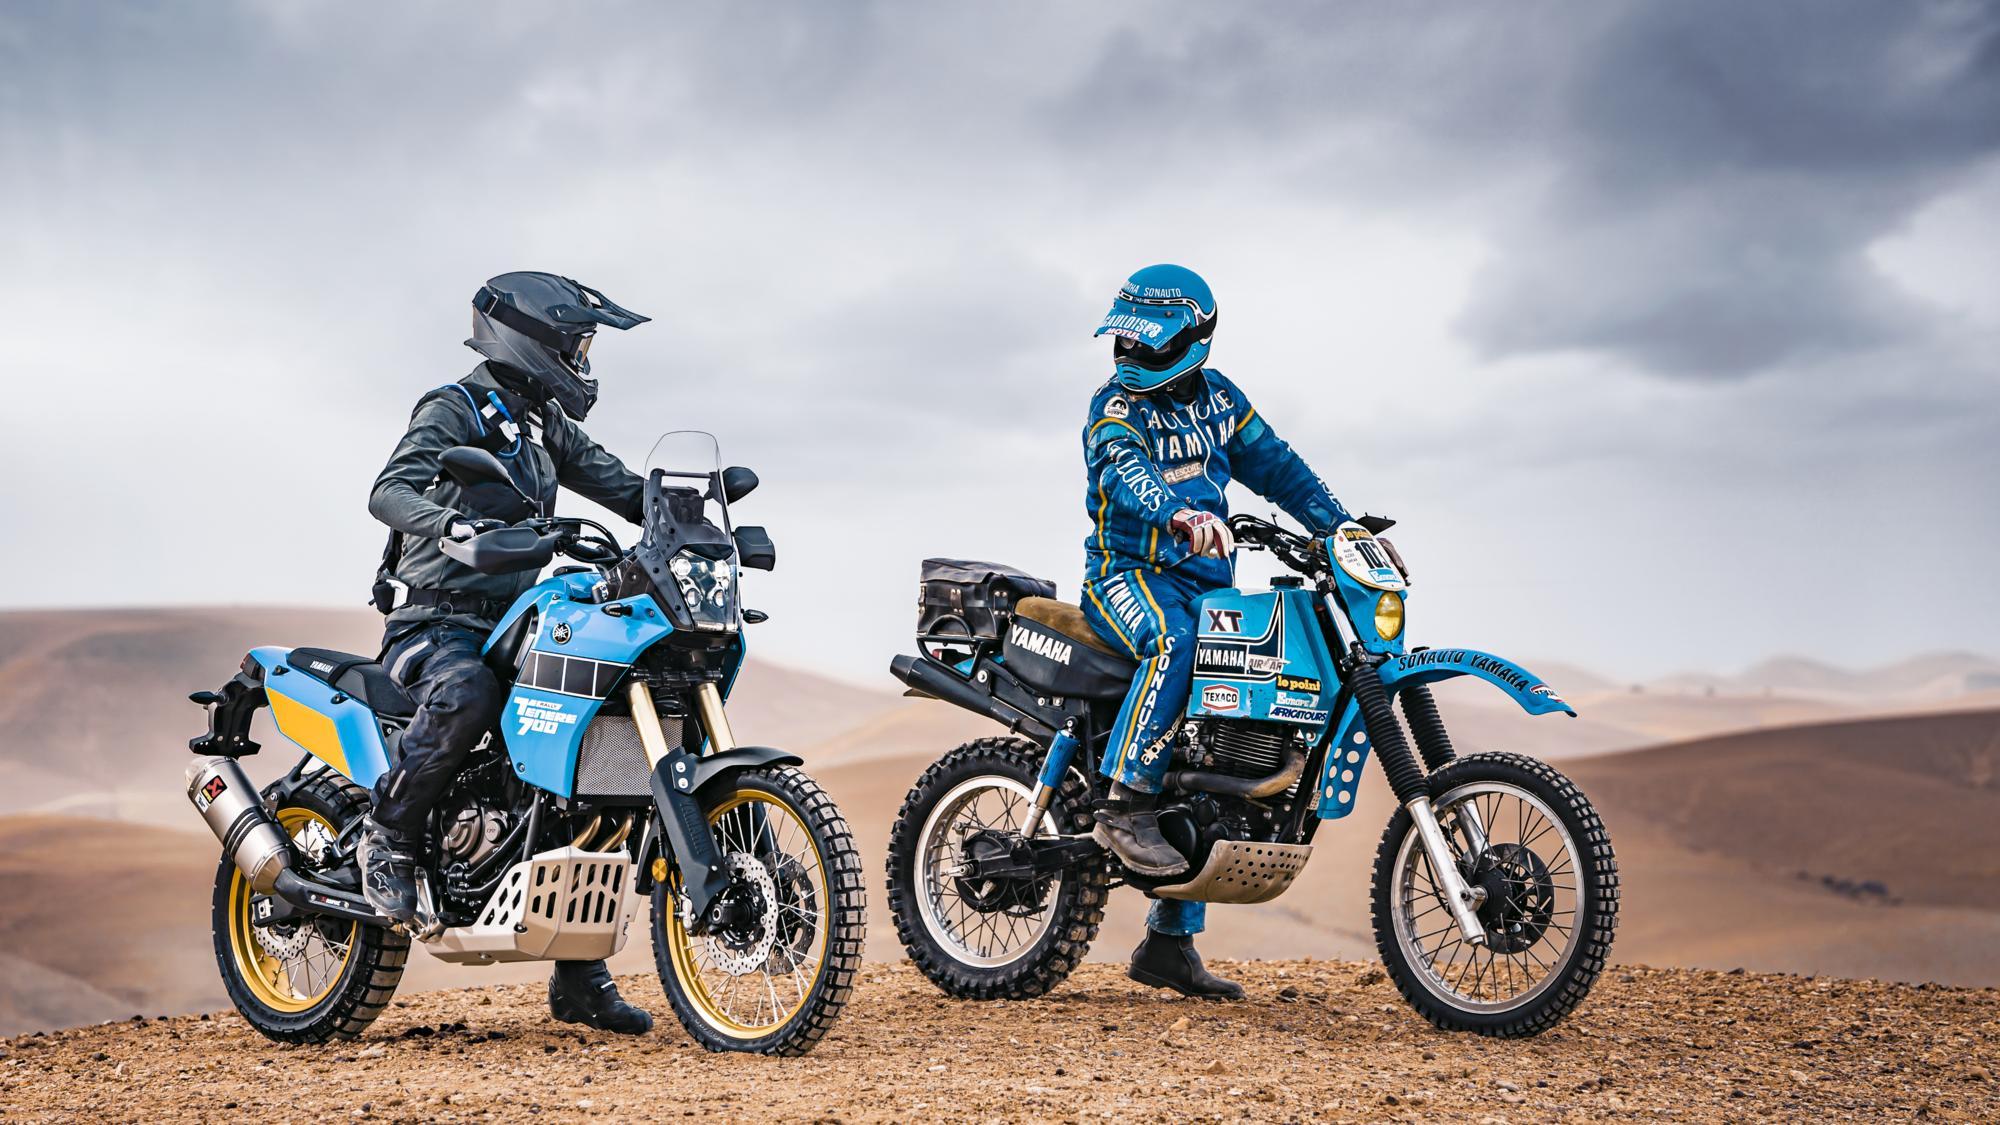 Two of Yamaha's Ténéré travel bikes. Media sourced from the Adventure Motorcycling Handbook.